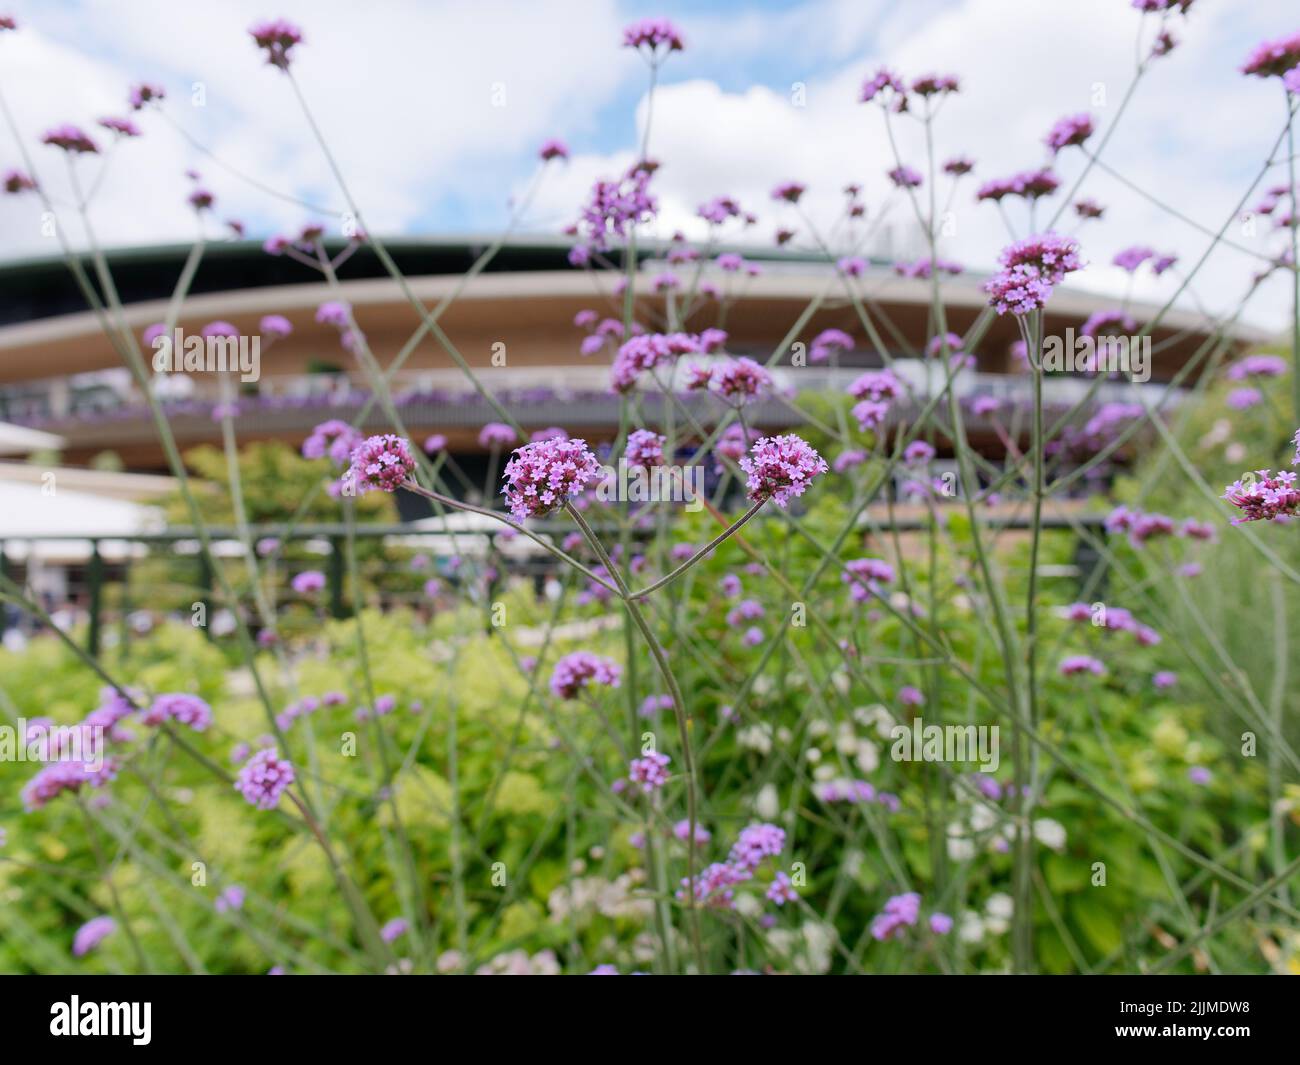 Wimbledon, Greater London, England, July 02 2022: Wimbledon Tennis Championship. Close up of flowers outside of one of the tennis courts. Stock Photo